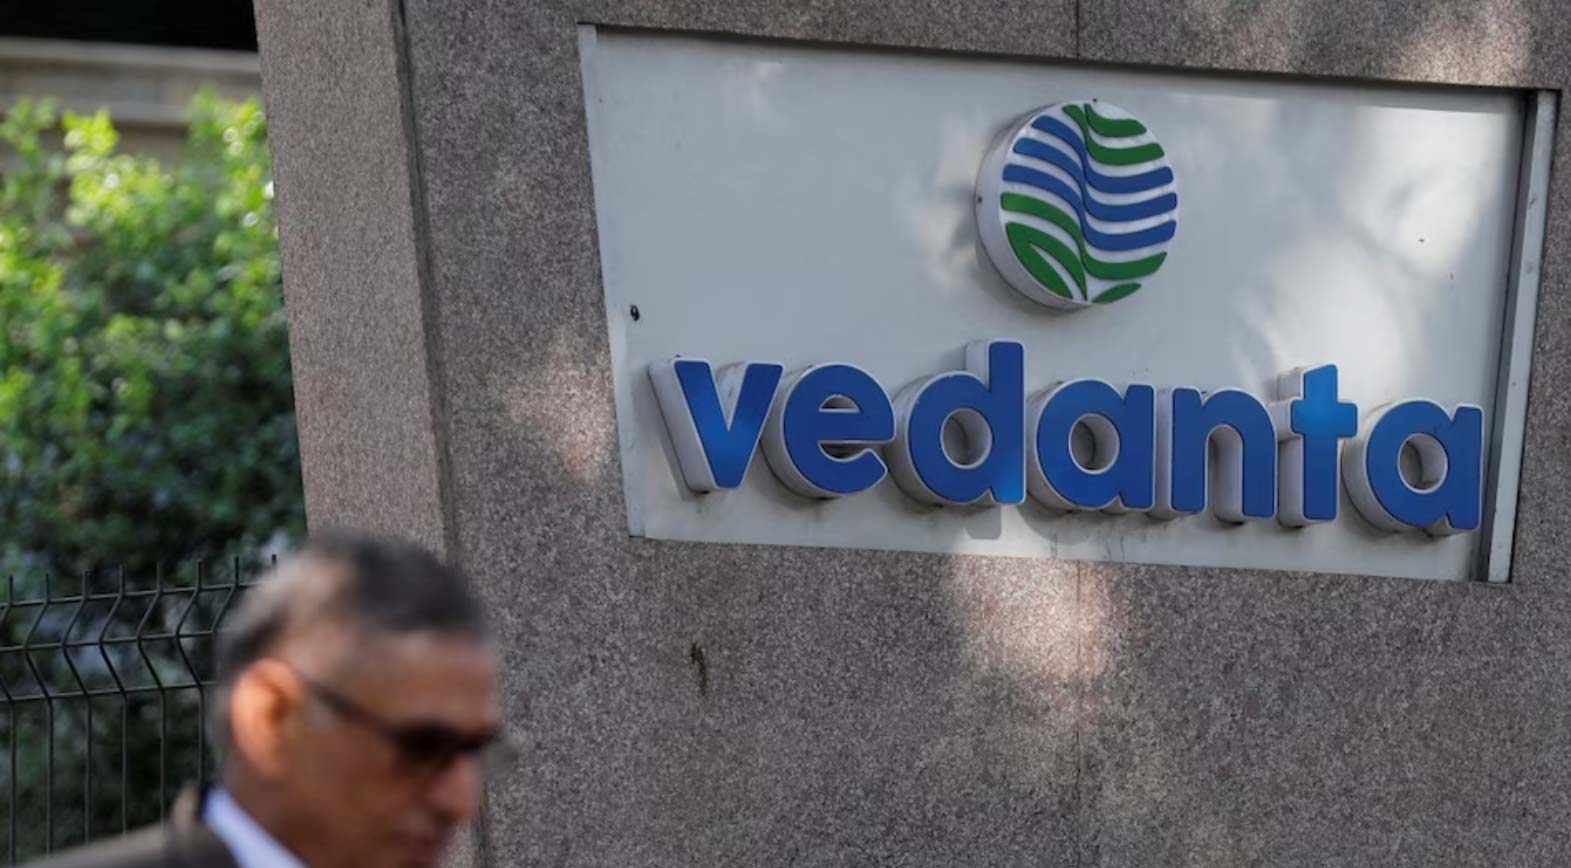 Vedanta 'Anil Agarwal' Says Their $5 Billion Made-in-India Chip Will Be Ready in 2.5 Years